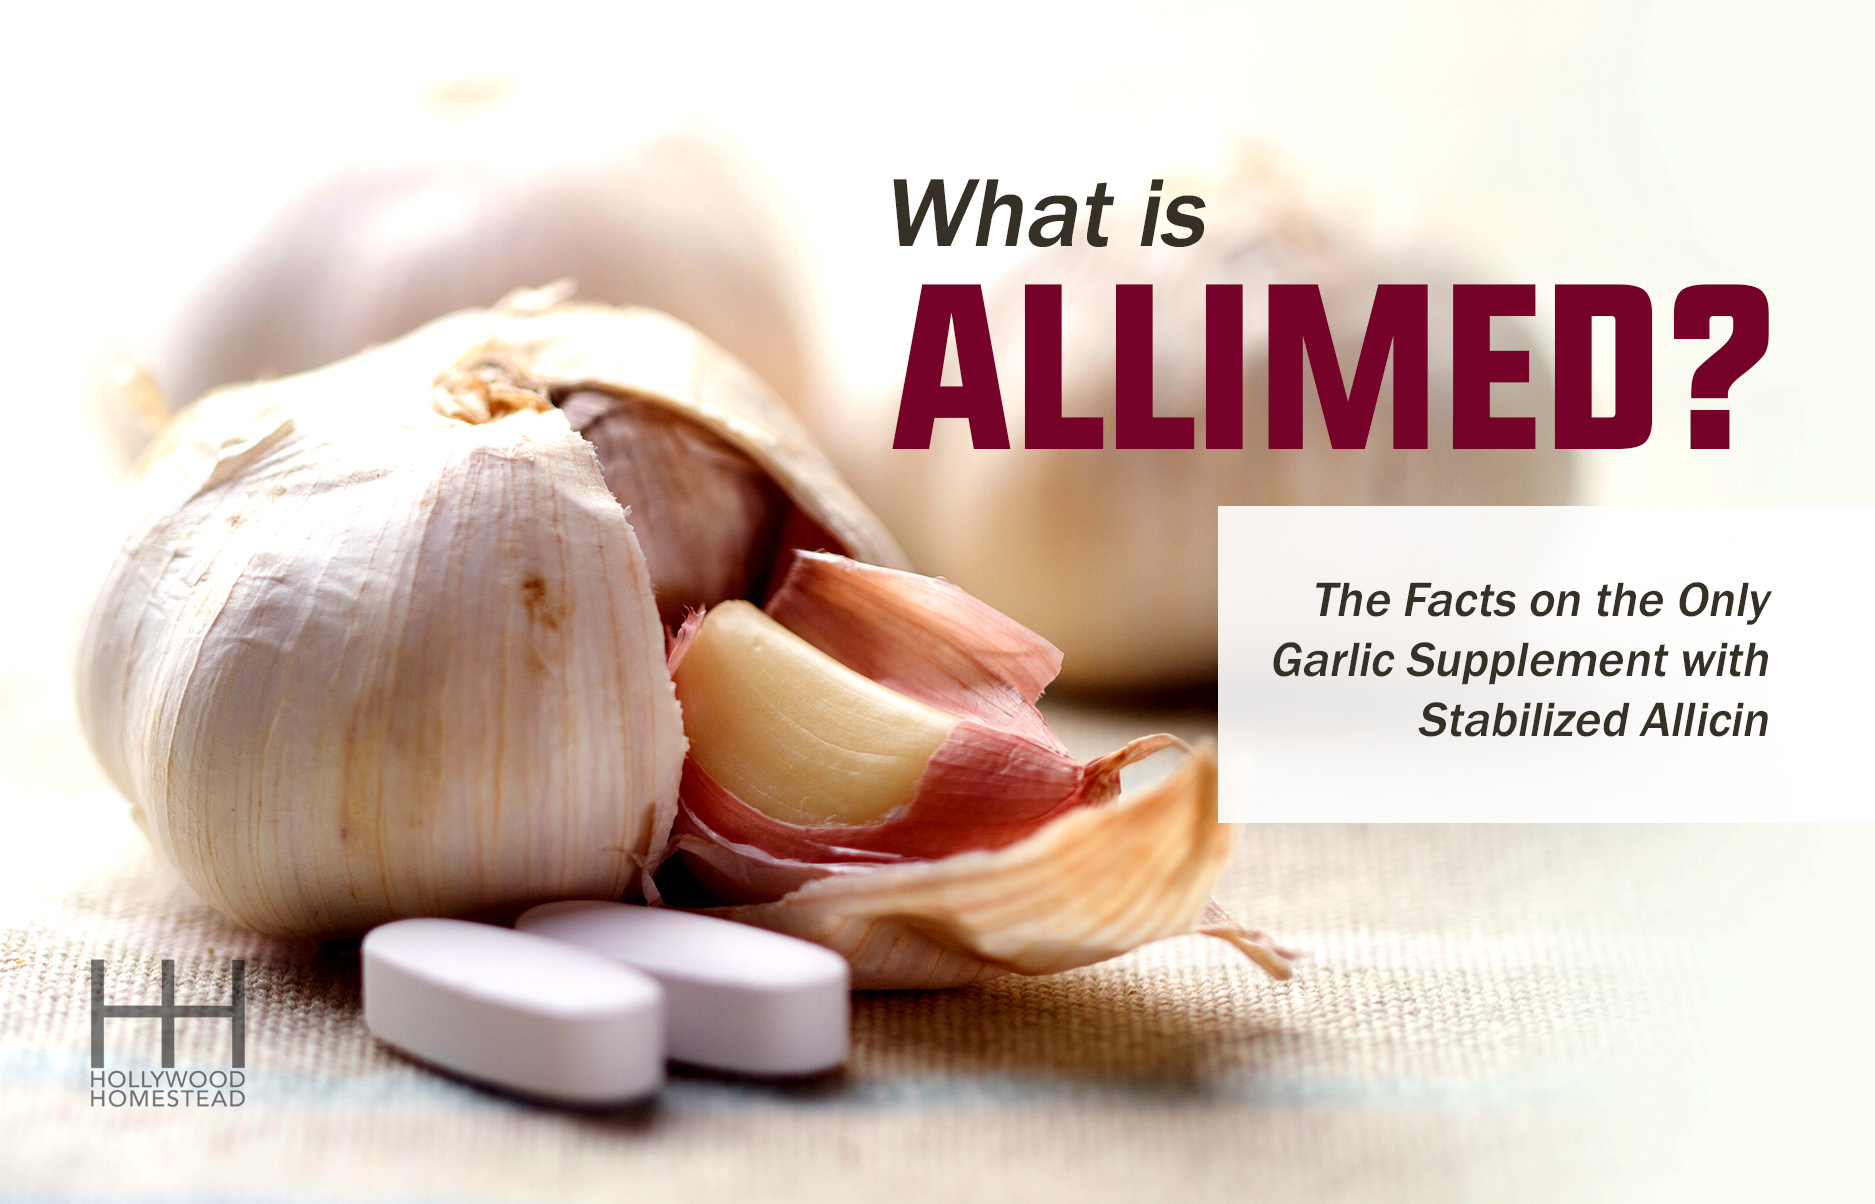 What is Allimed? The Facts on the Only Garlic Supplement with Stabilized Allicin